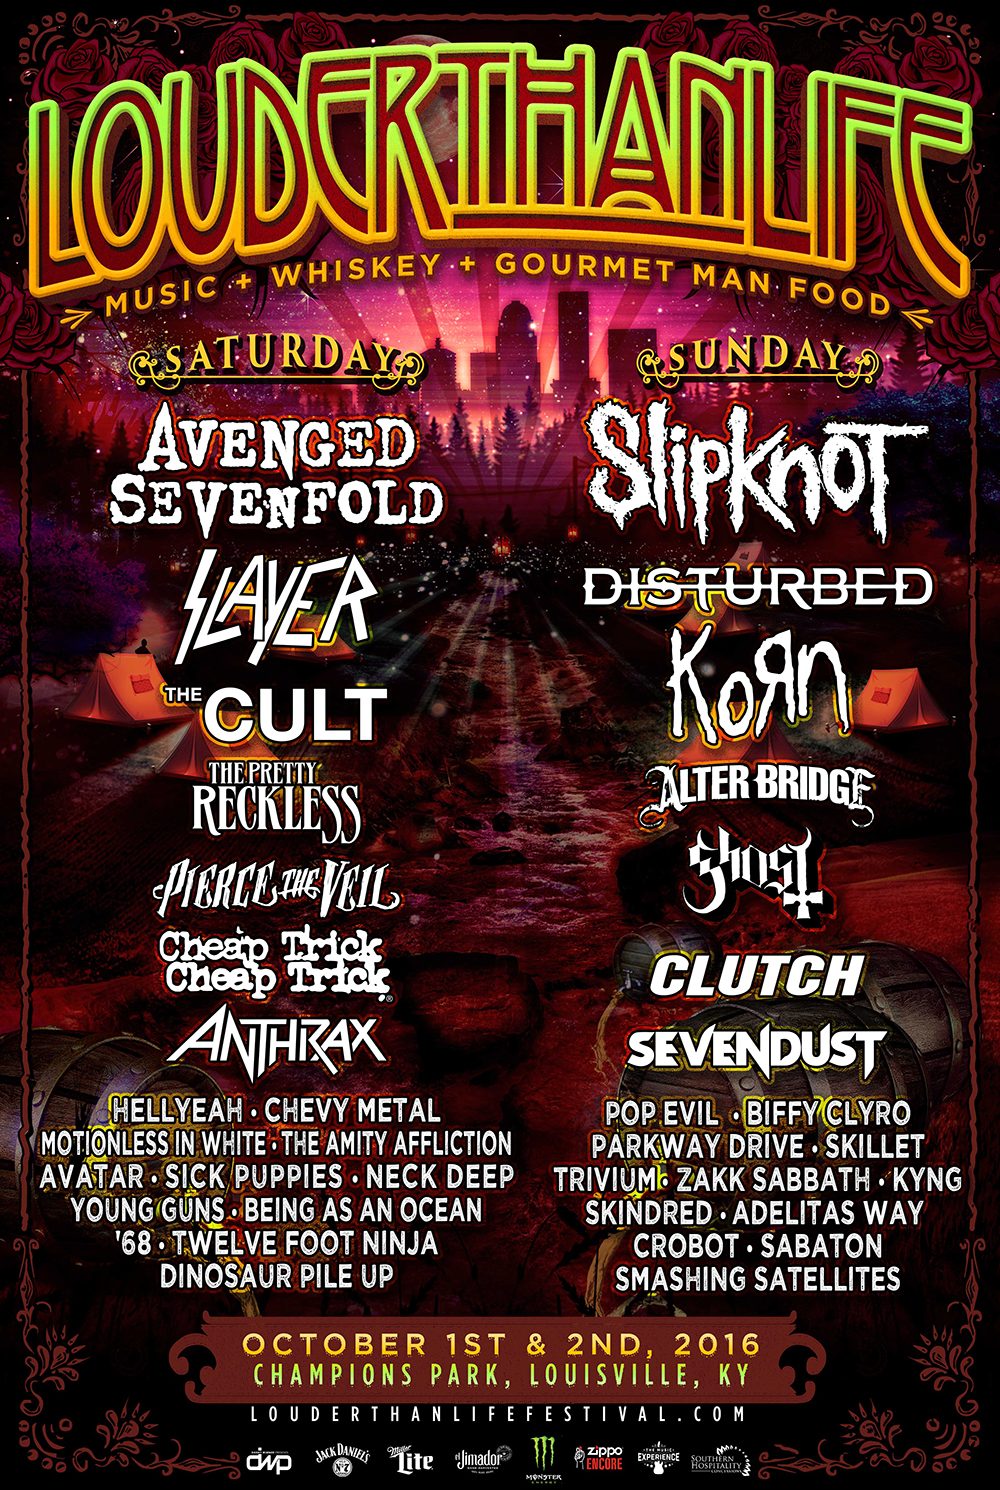 Louder Than Life Festival Announces 2016 Lineup Featuring Avenged